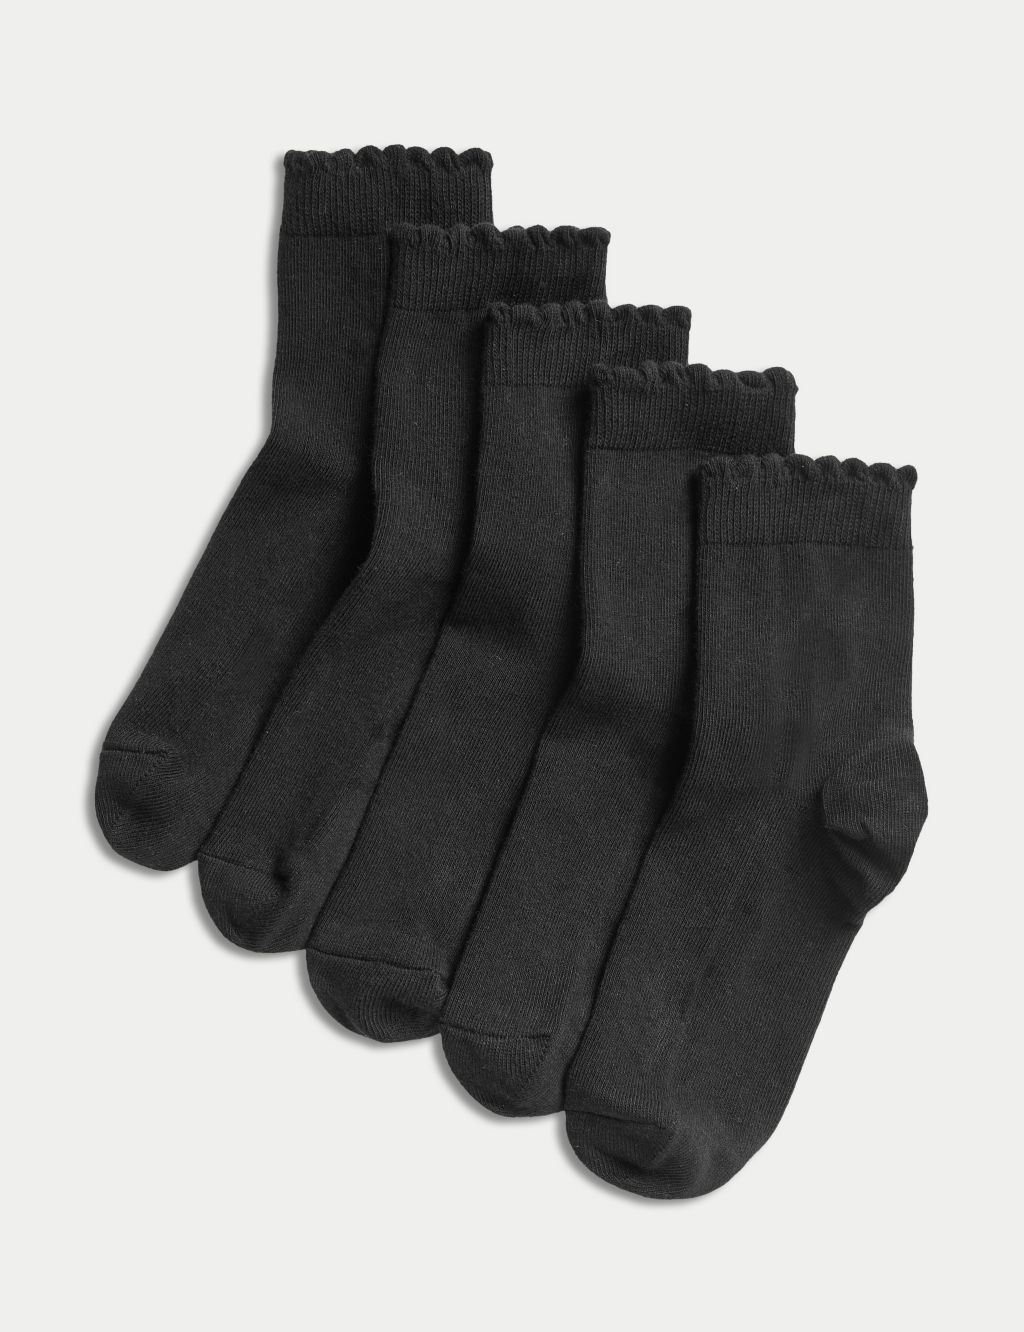 3 Pack Gentle Grip Ankle Socks (One Size) - Matalan